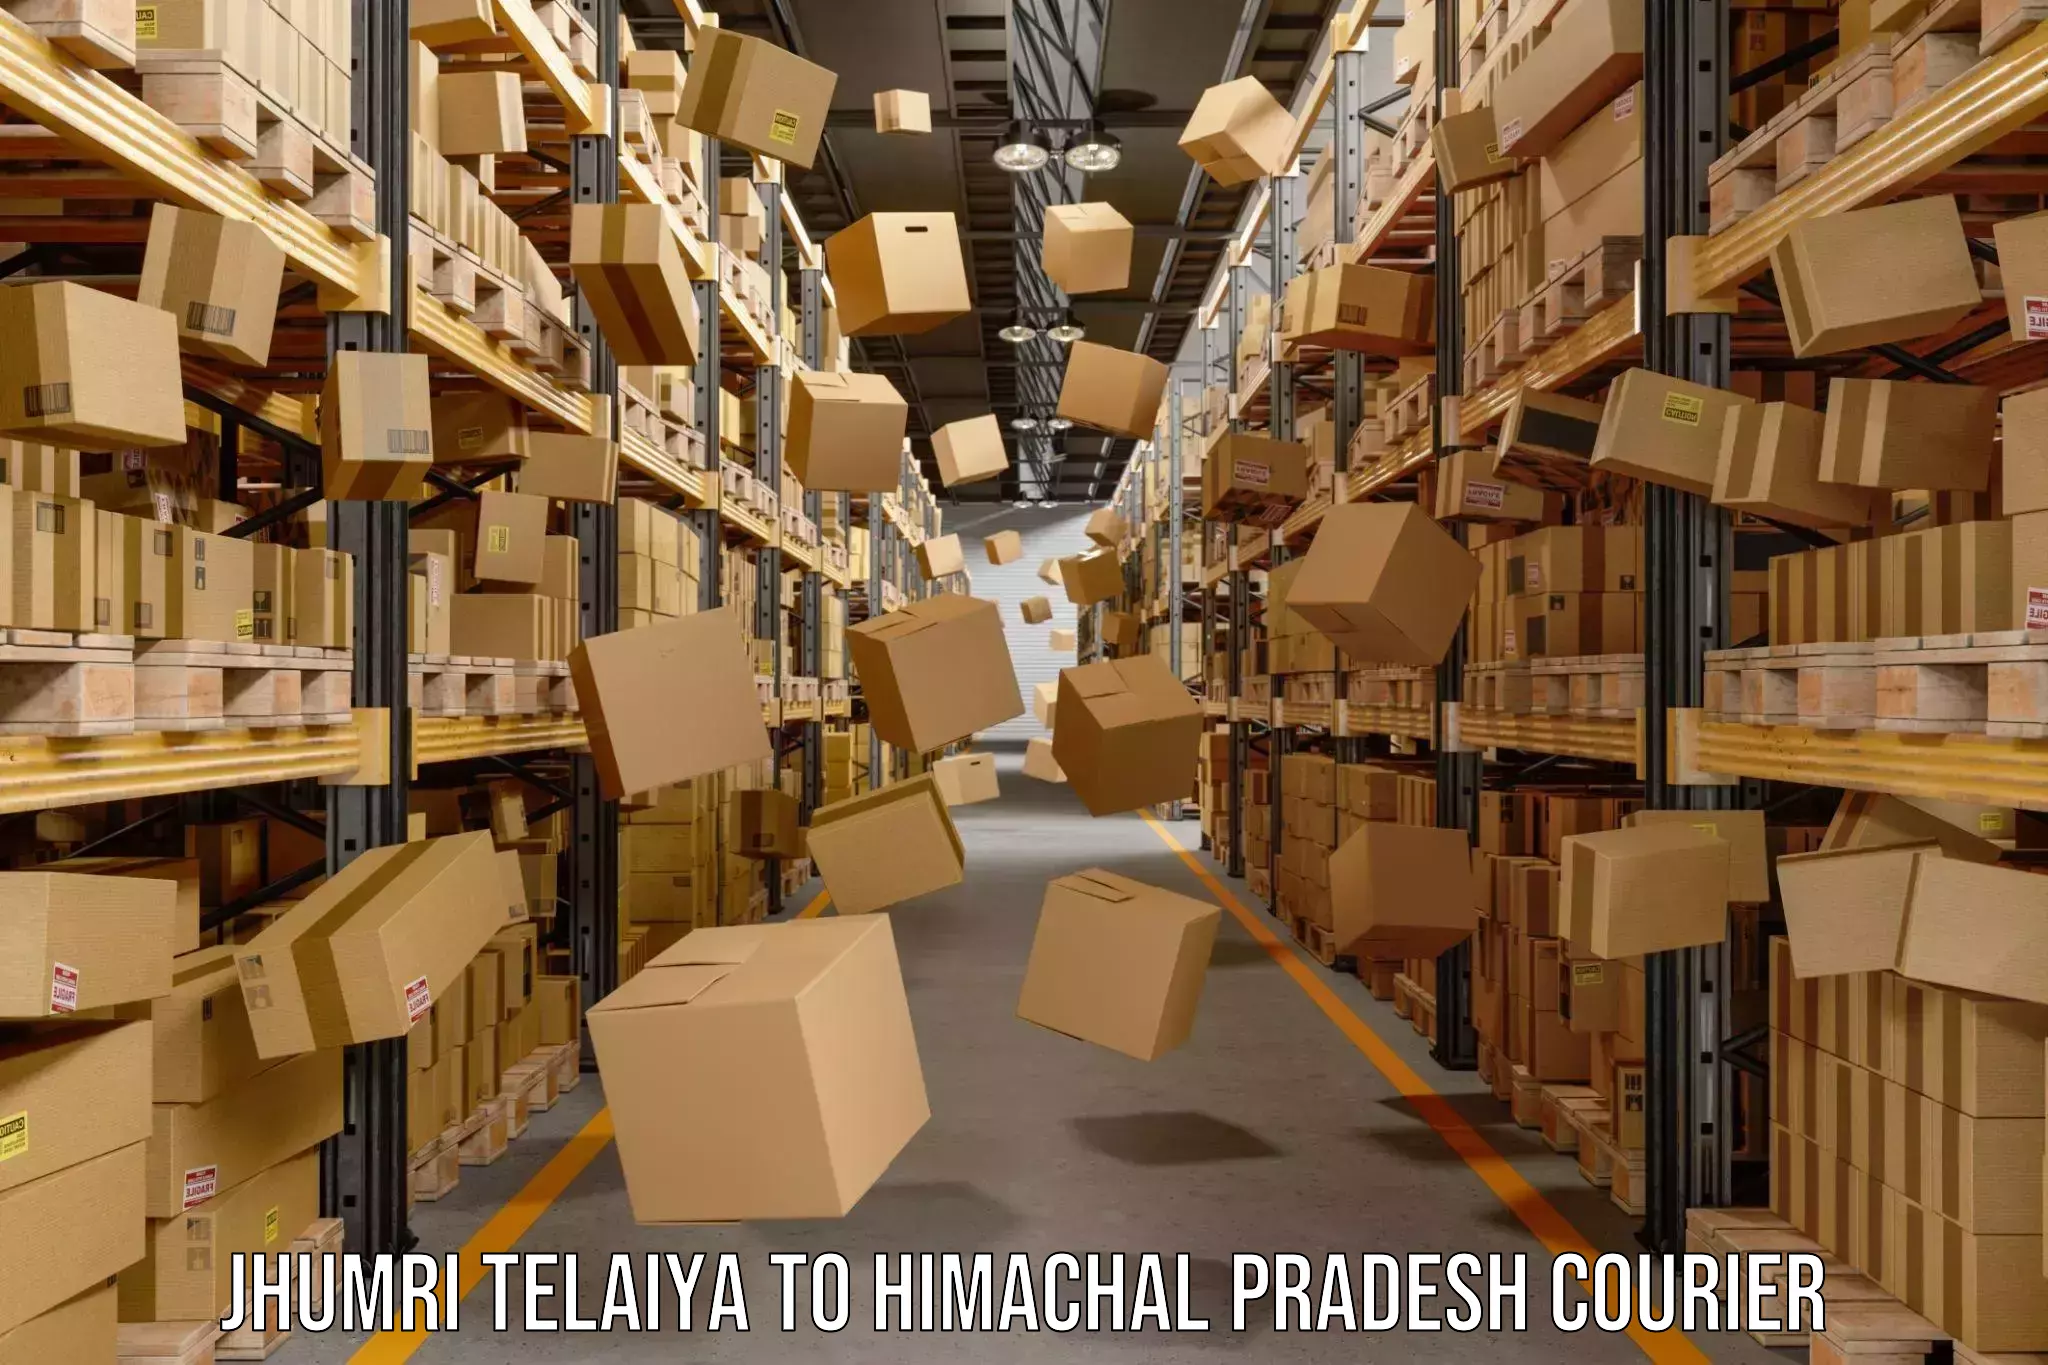 Comprehensive parcel tracking Jhumri Telaiya to YS Parmar University of Horticulture and Forestry Solan